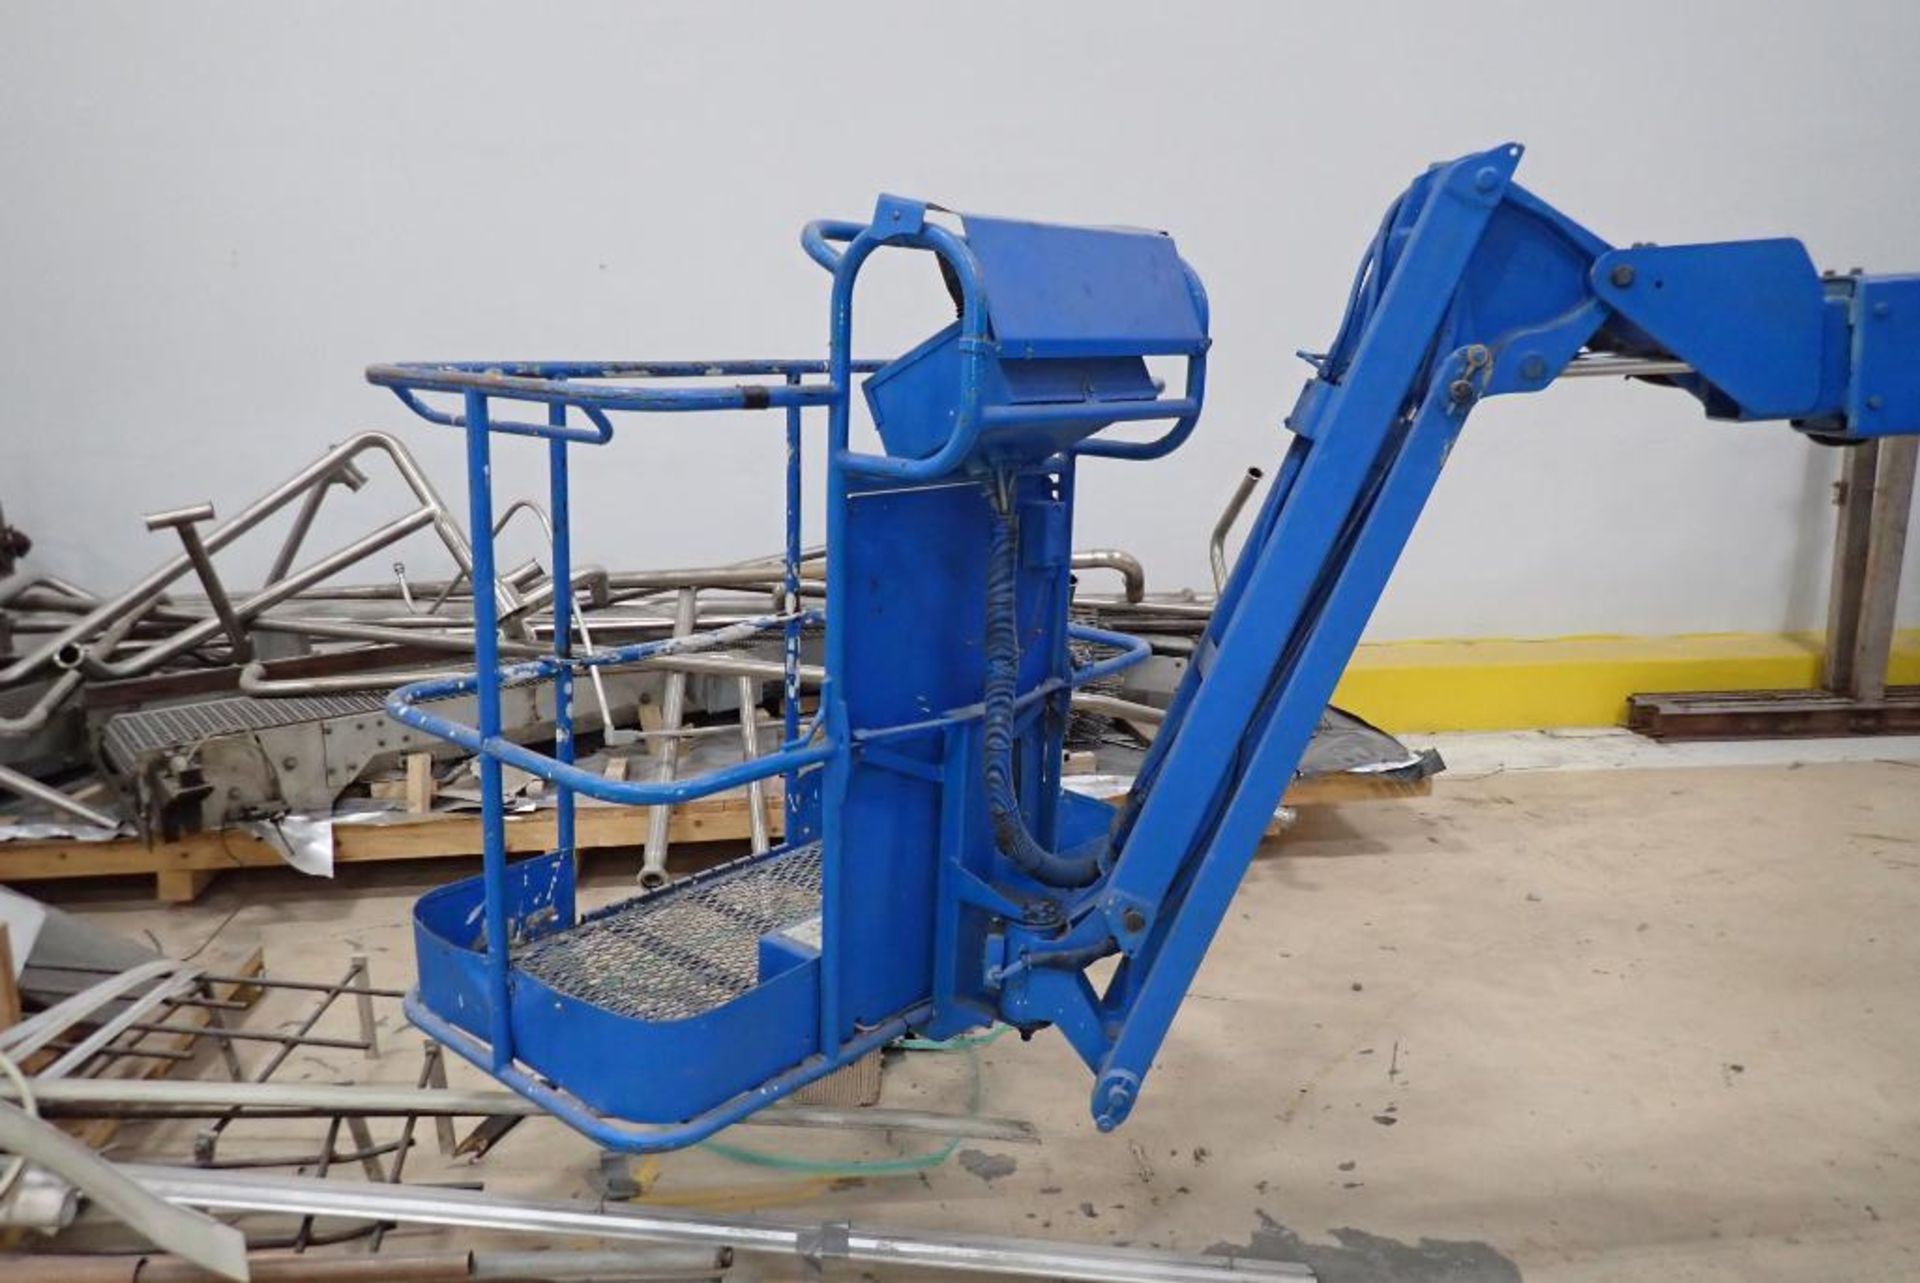 2002 Genie electric boom lift - Image 19 of 20